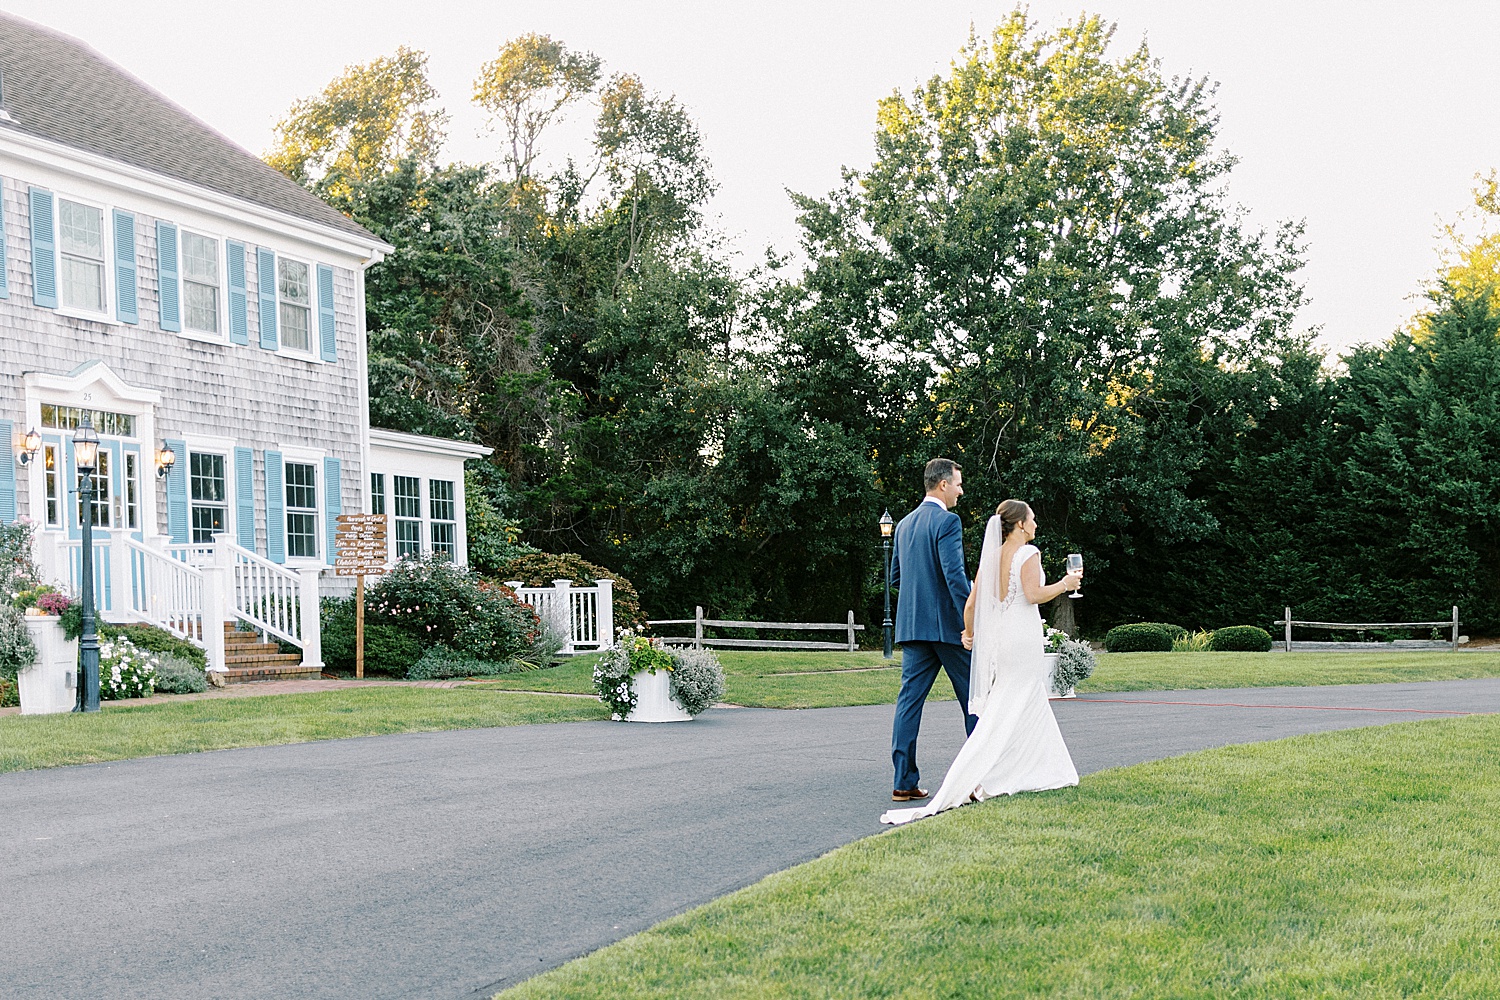 Bride and groom walking next to a house on their way to reception 